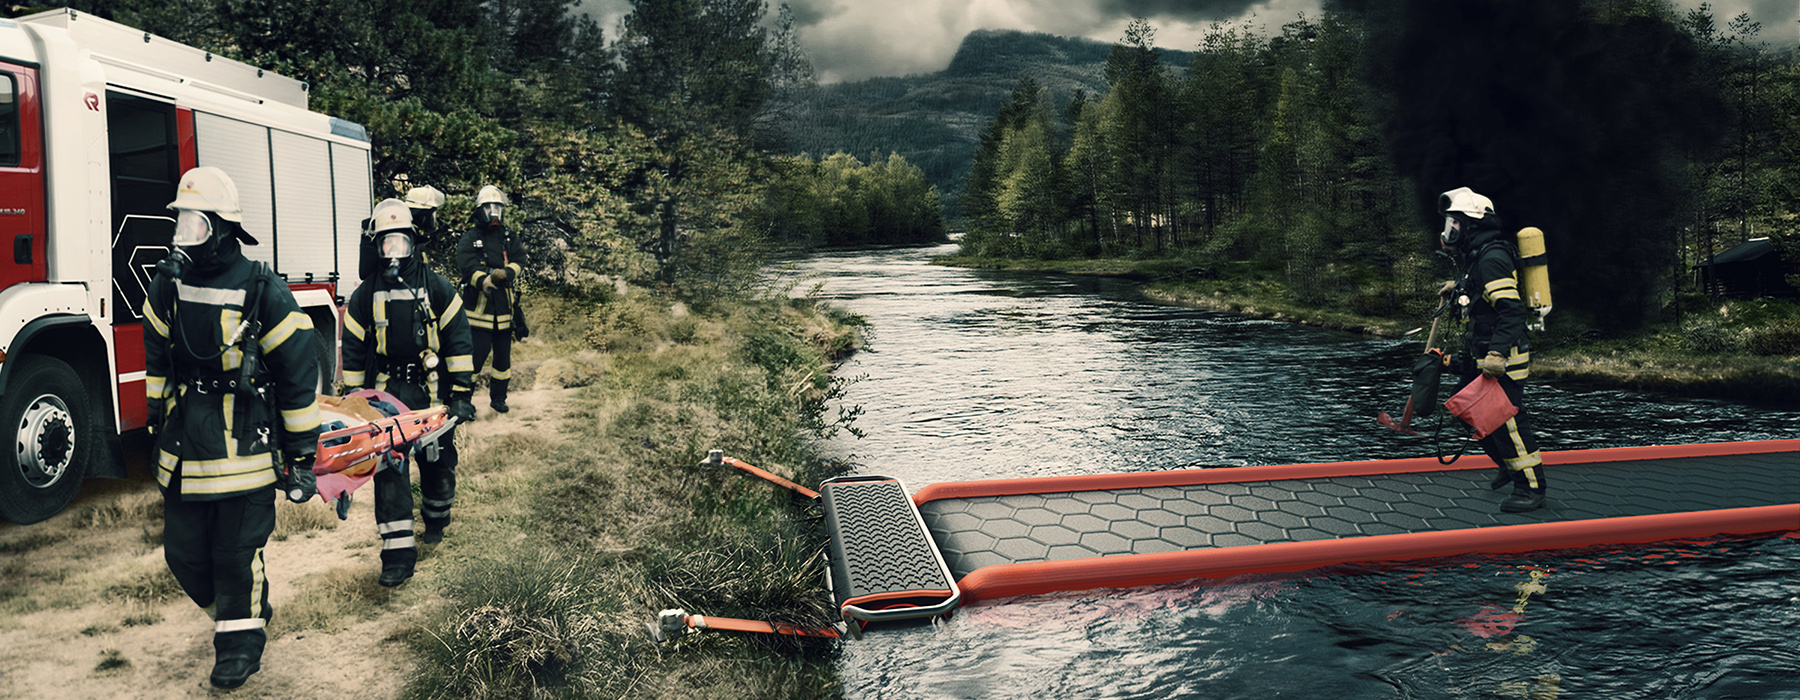 simeon ortmüller proposes ACCESS, an emergency river-crossing device